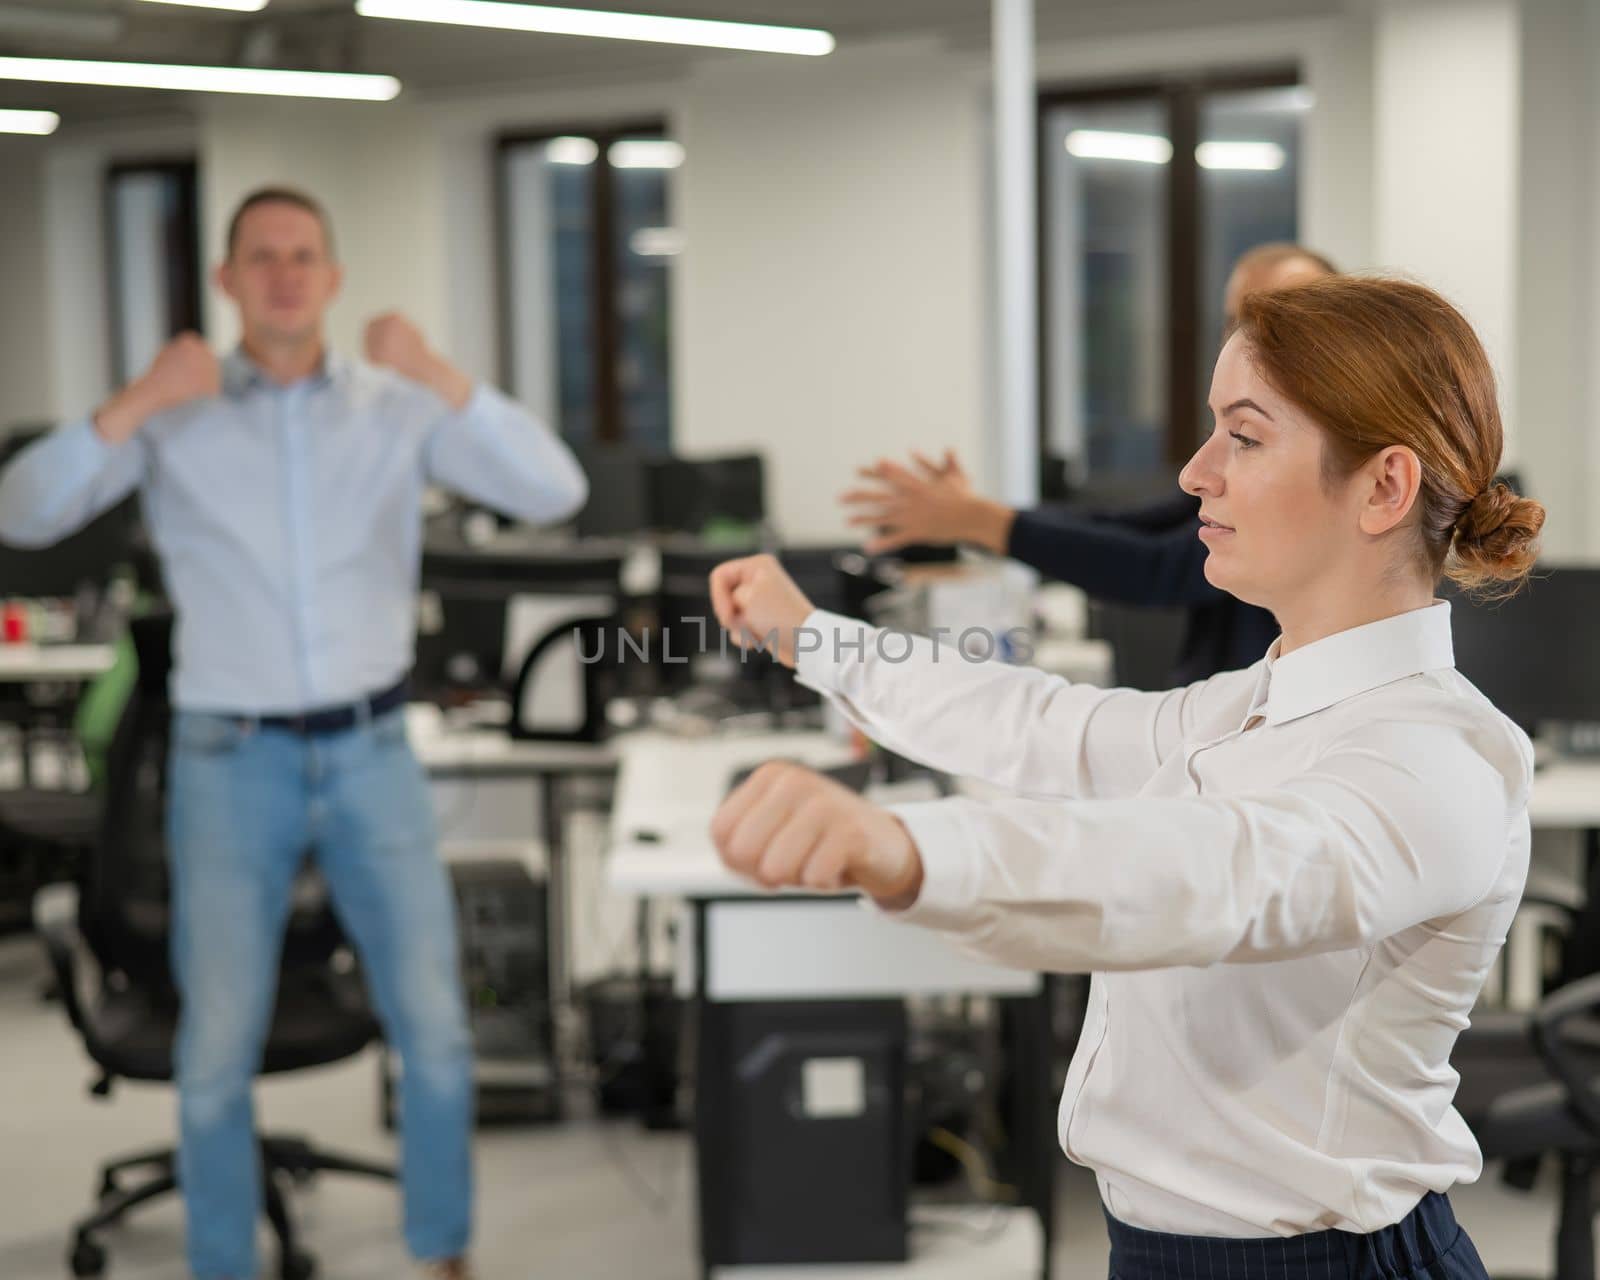 Three office workers warm up during a break. Employees do fitness exercises at the workplace